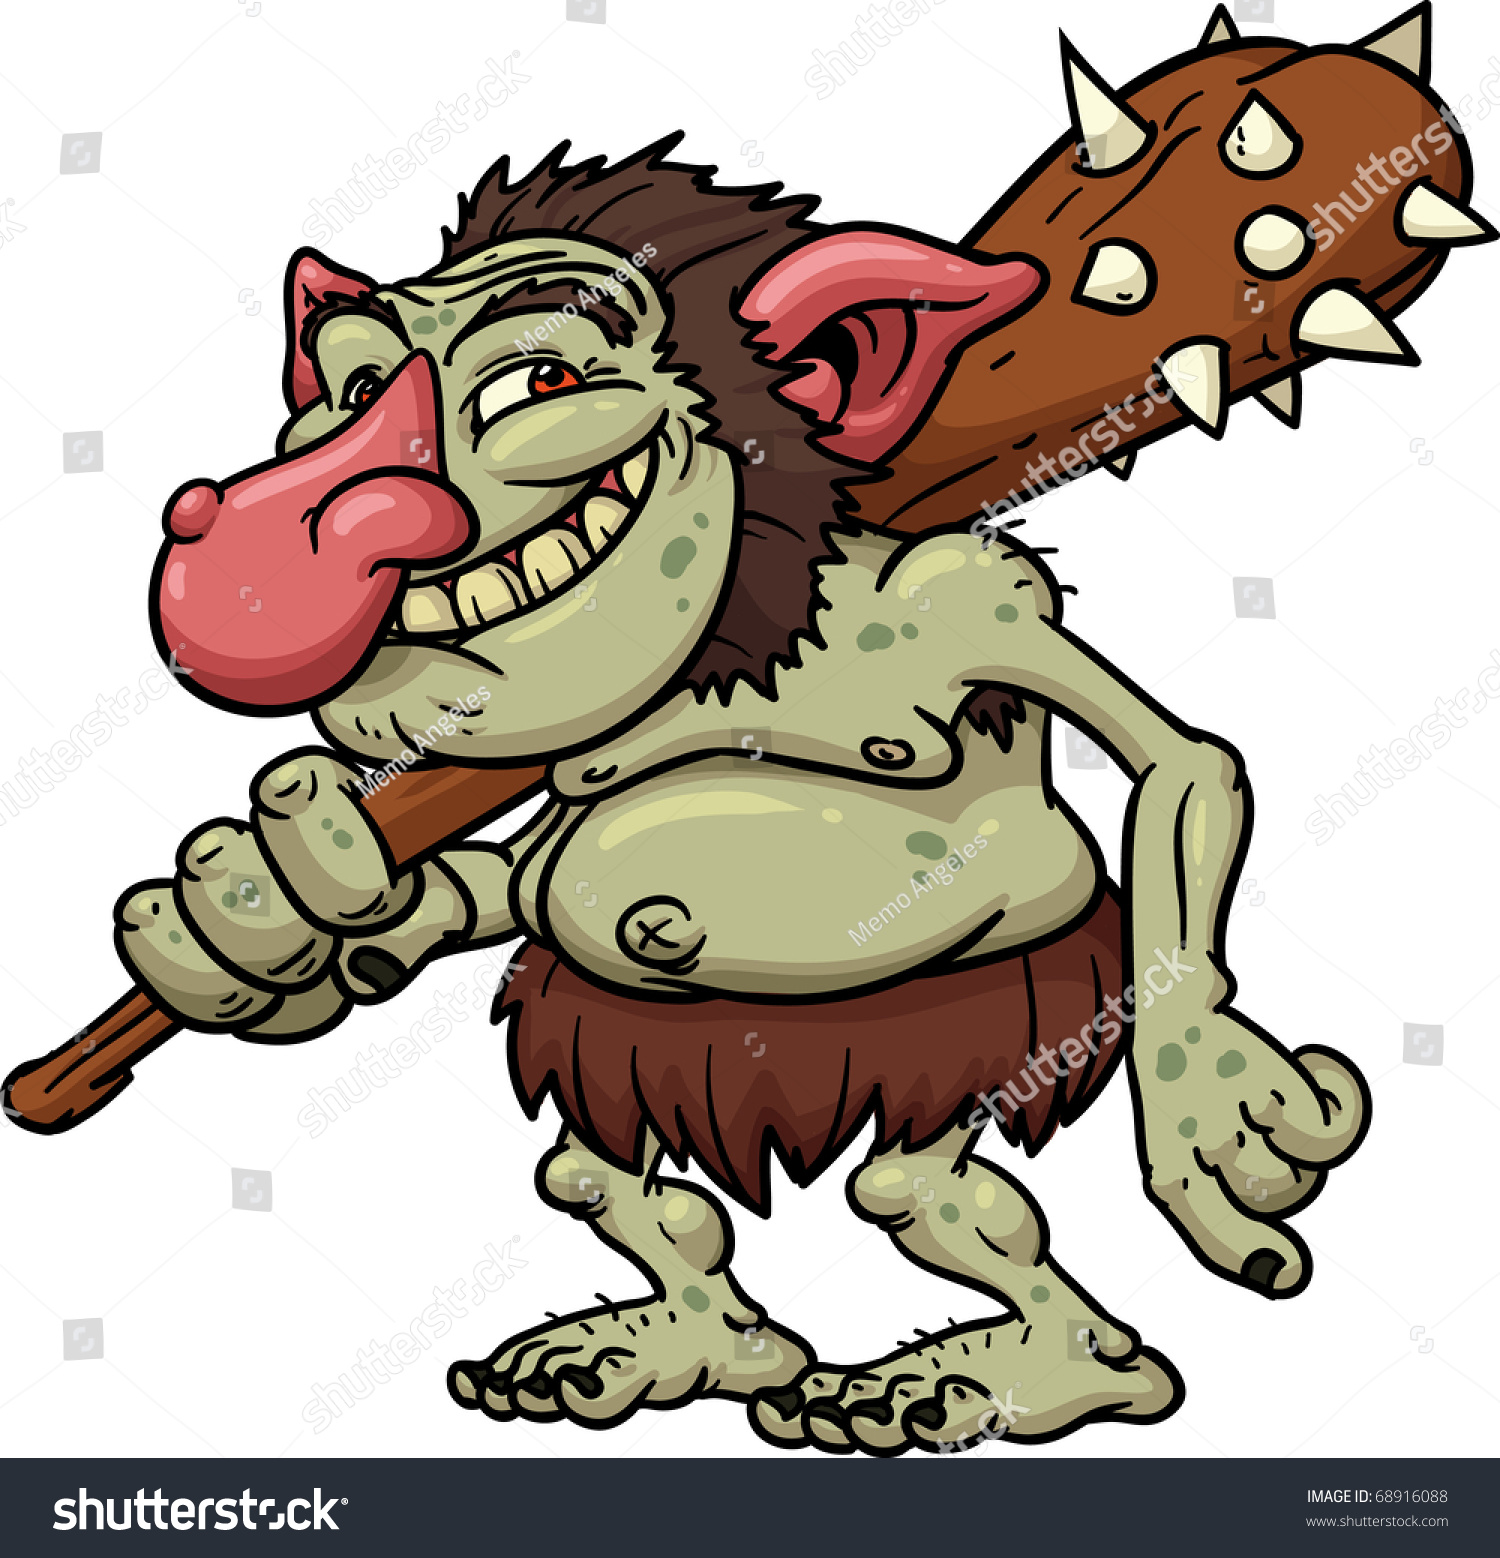 stock-vector-cartoon-troll-holding-a-club-vector-illustration-with-no-gradients-all-in-a-single-layer-68916088.jpg